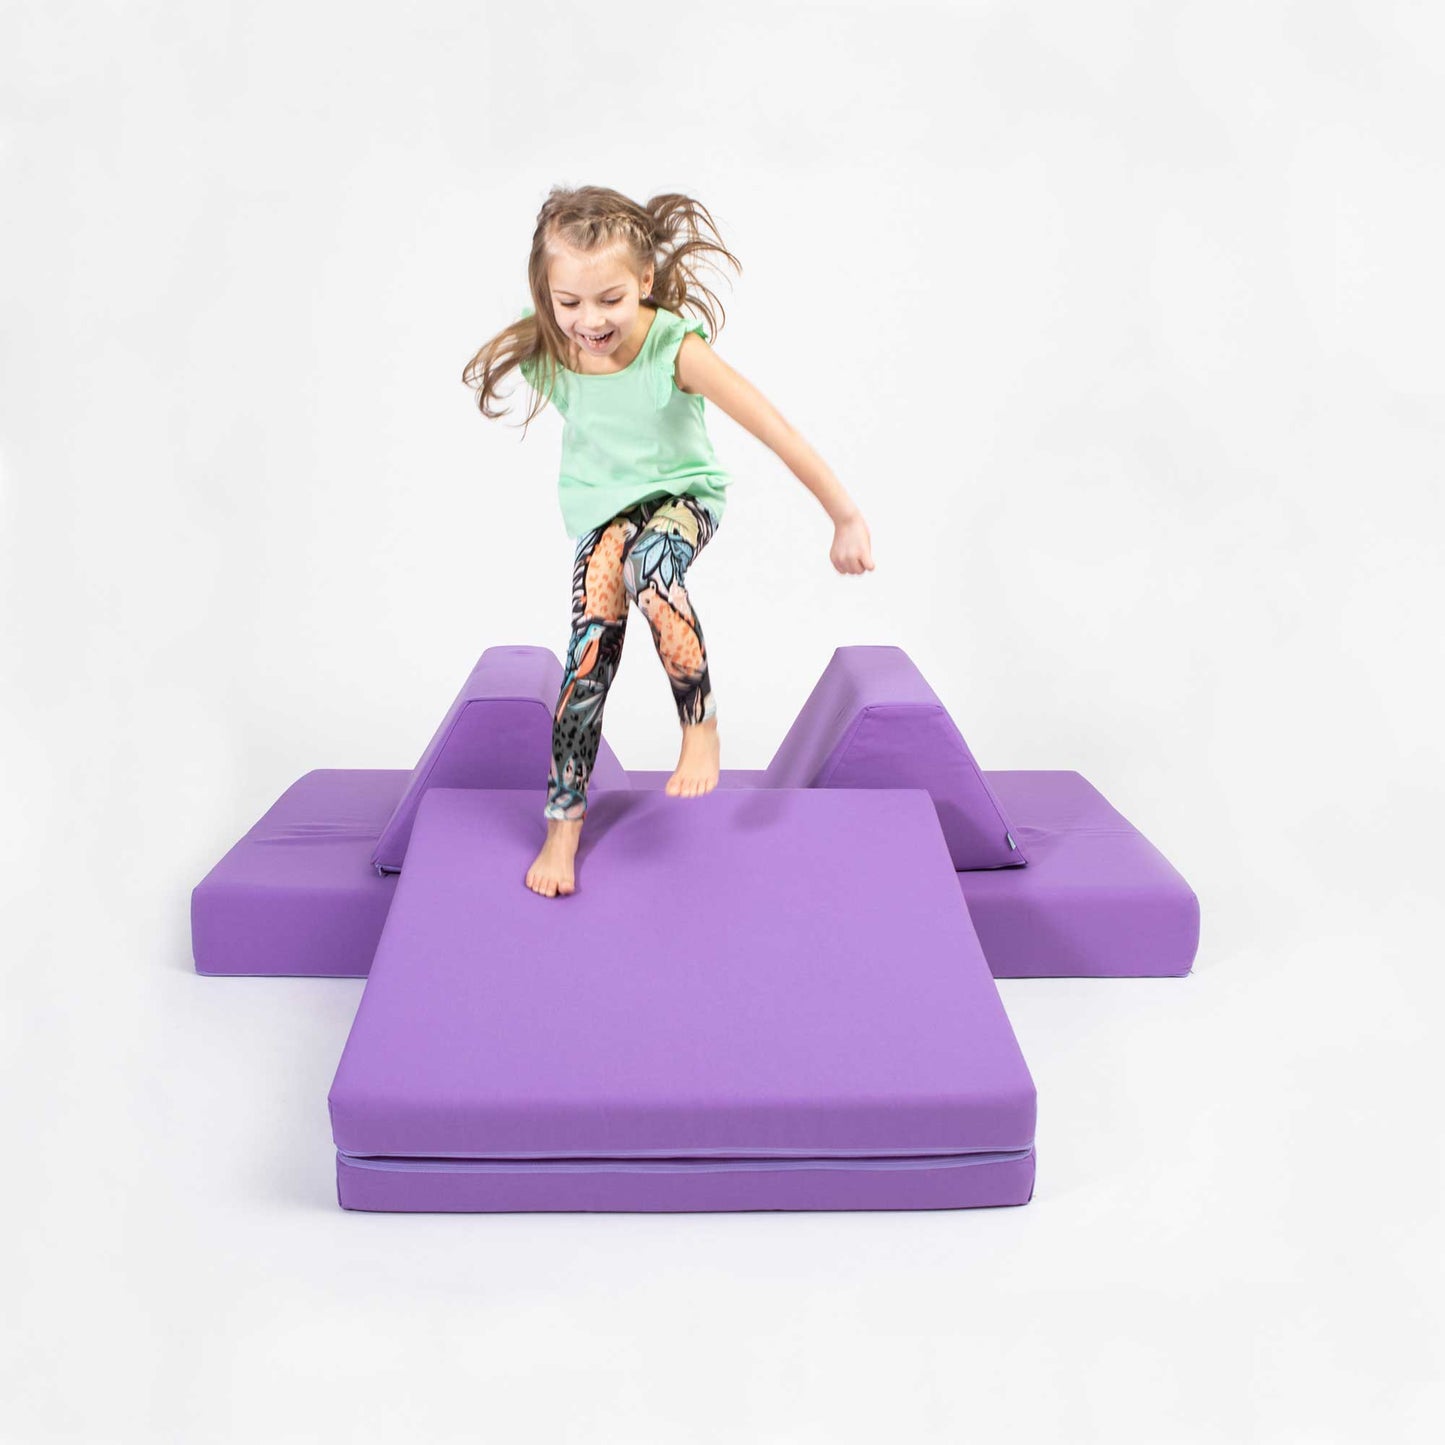 A girl jumping on a purple Monboxy play sofa set